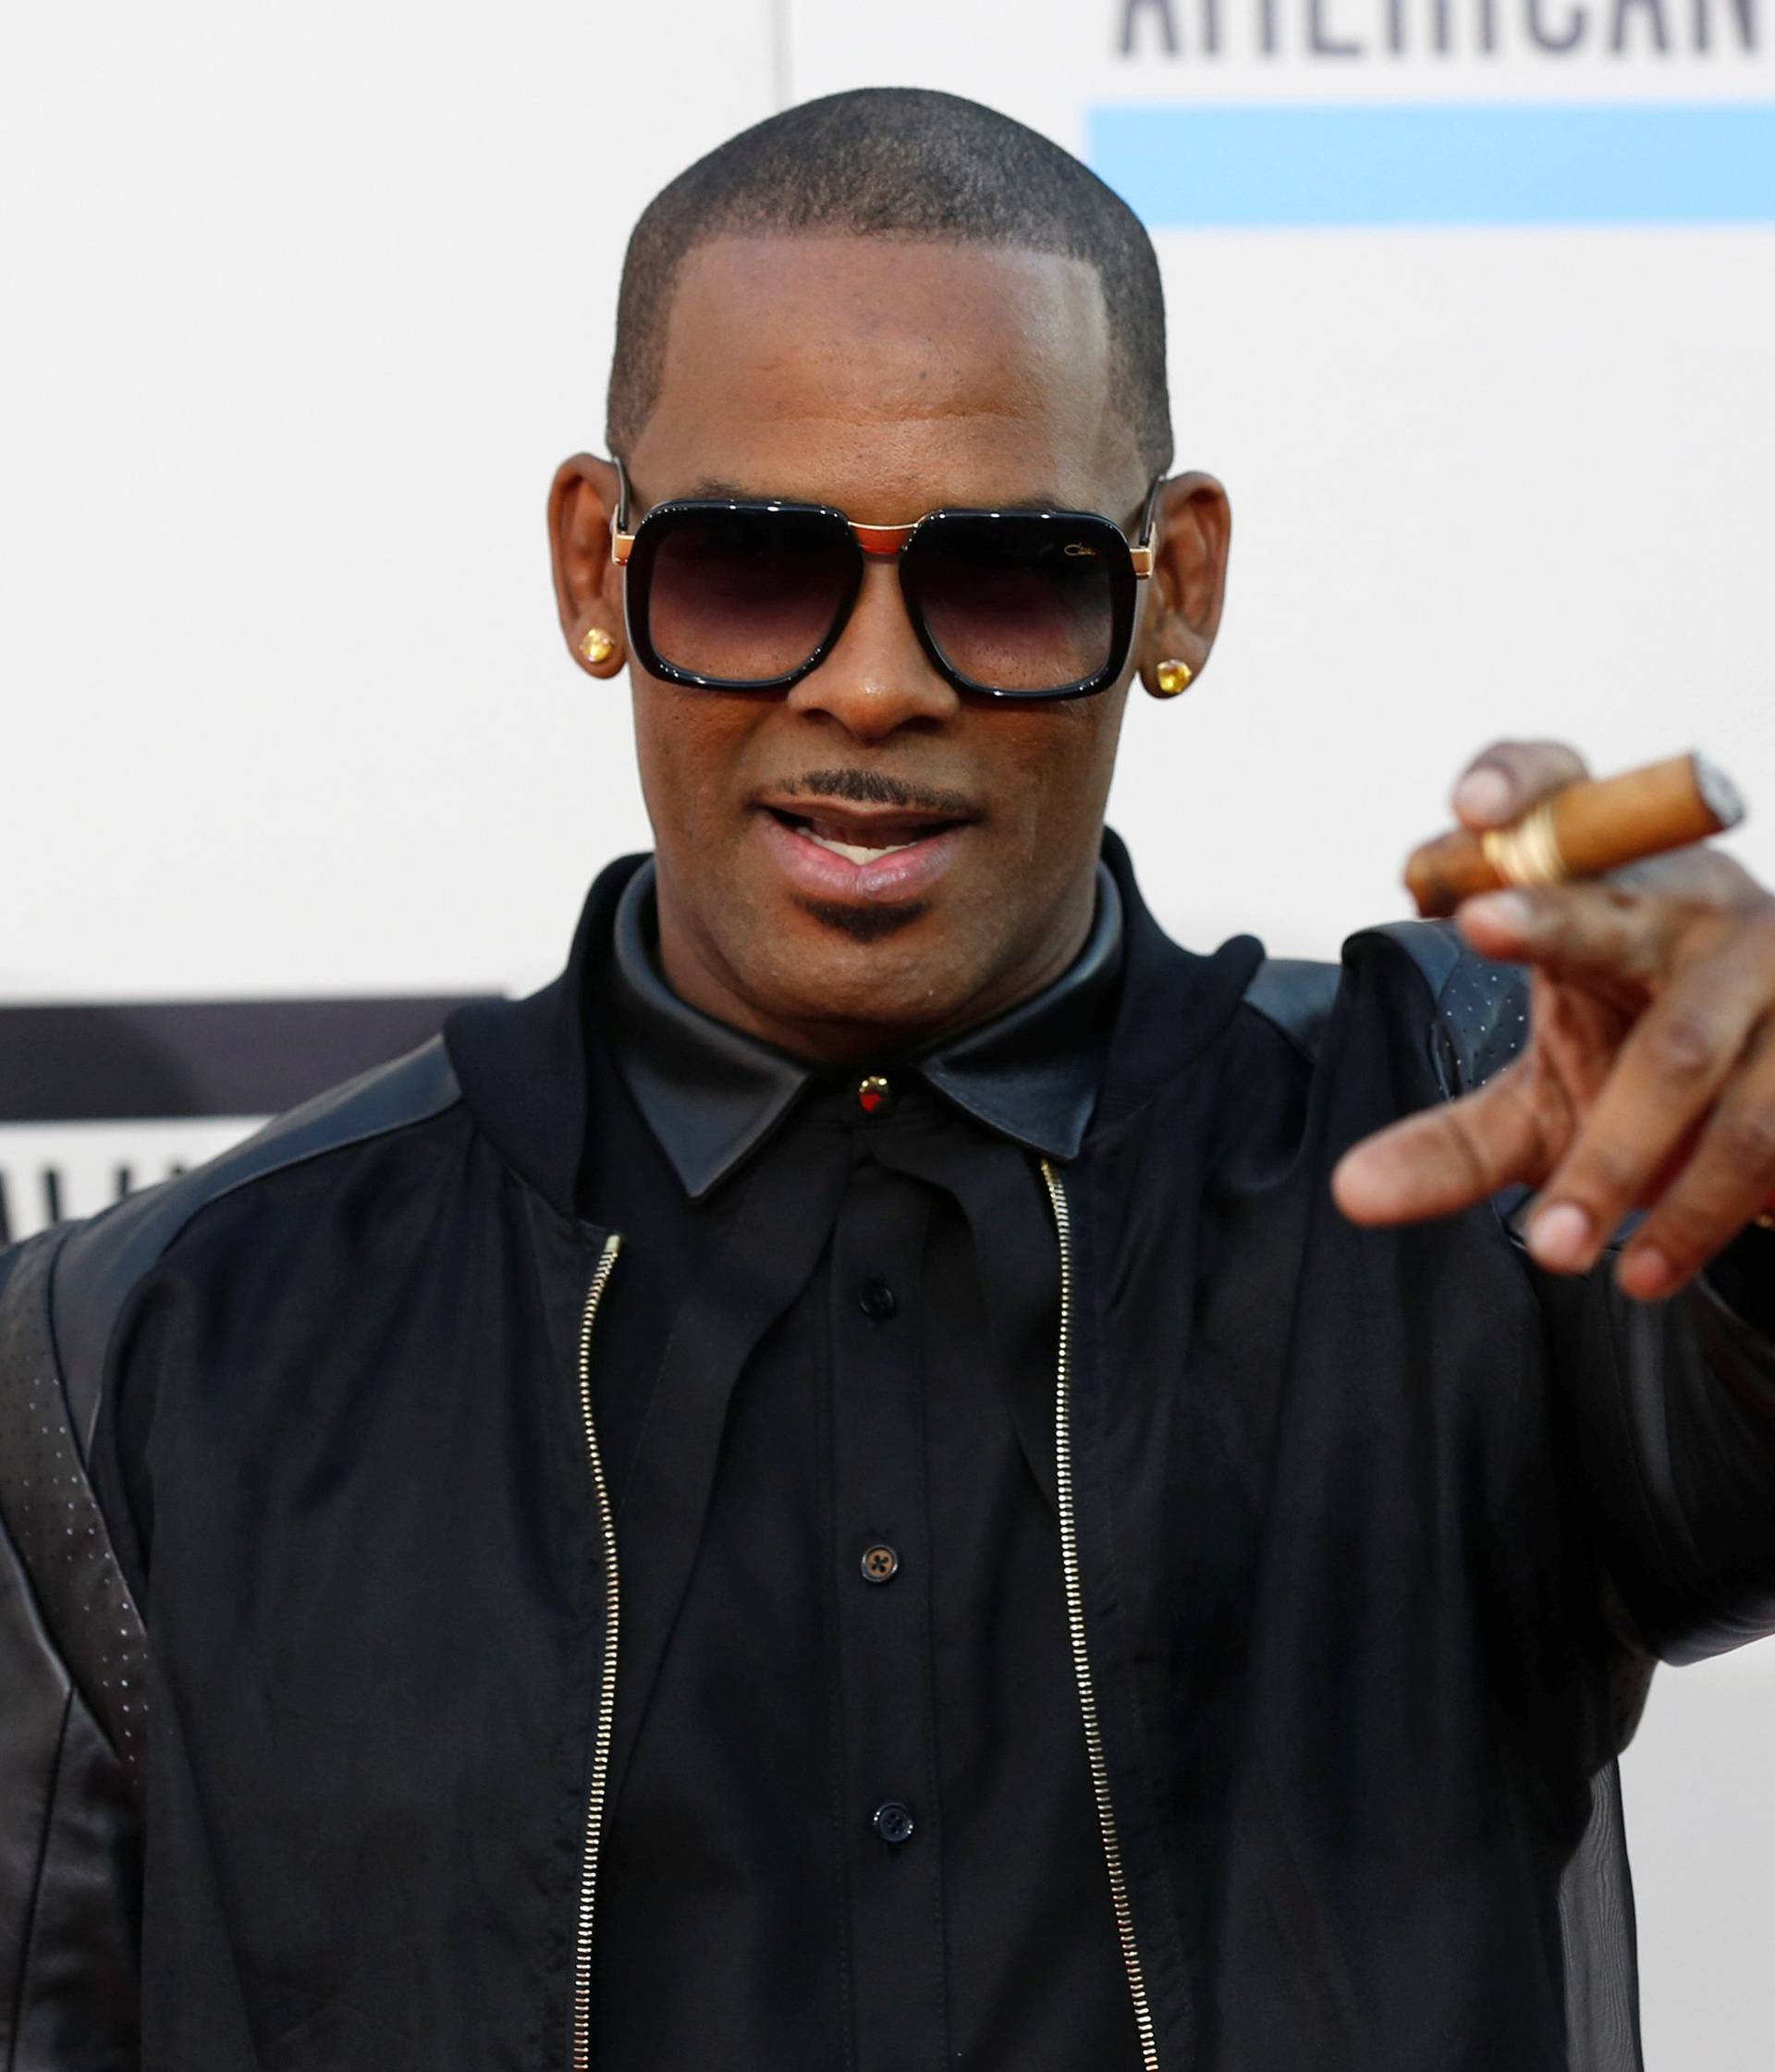 FILE PHOTO: Singer R. Kelly arrives at the 41st American Music Awards in Los Angeles